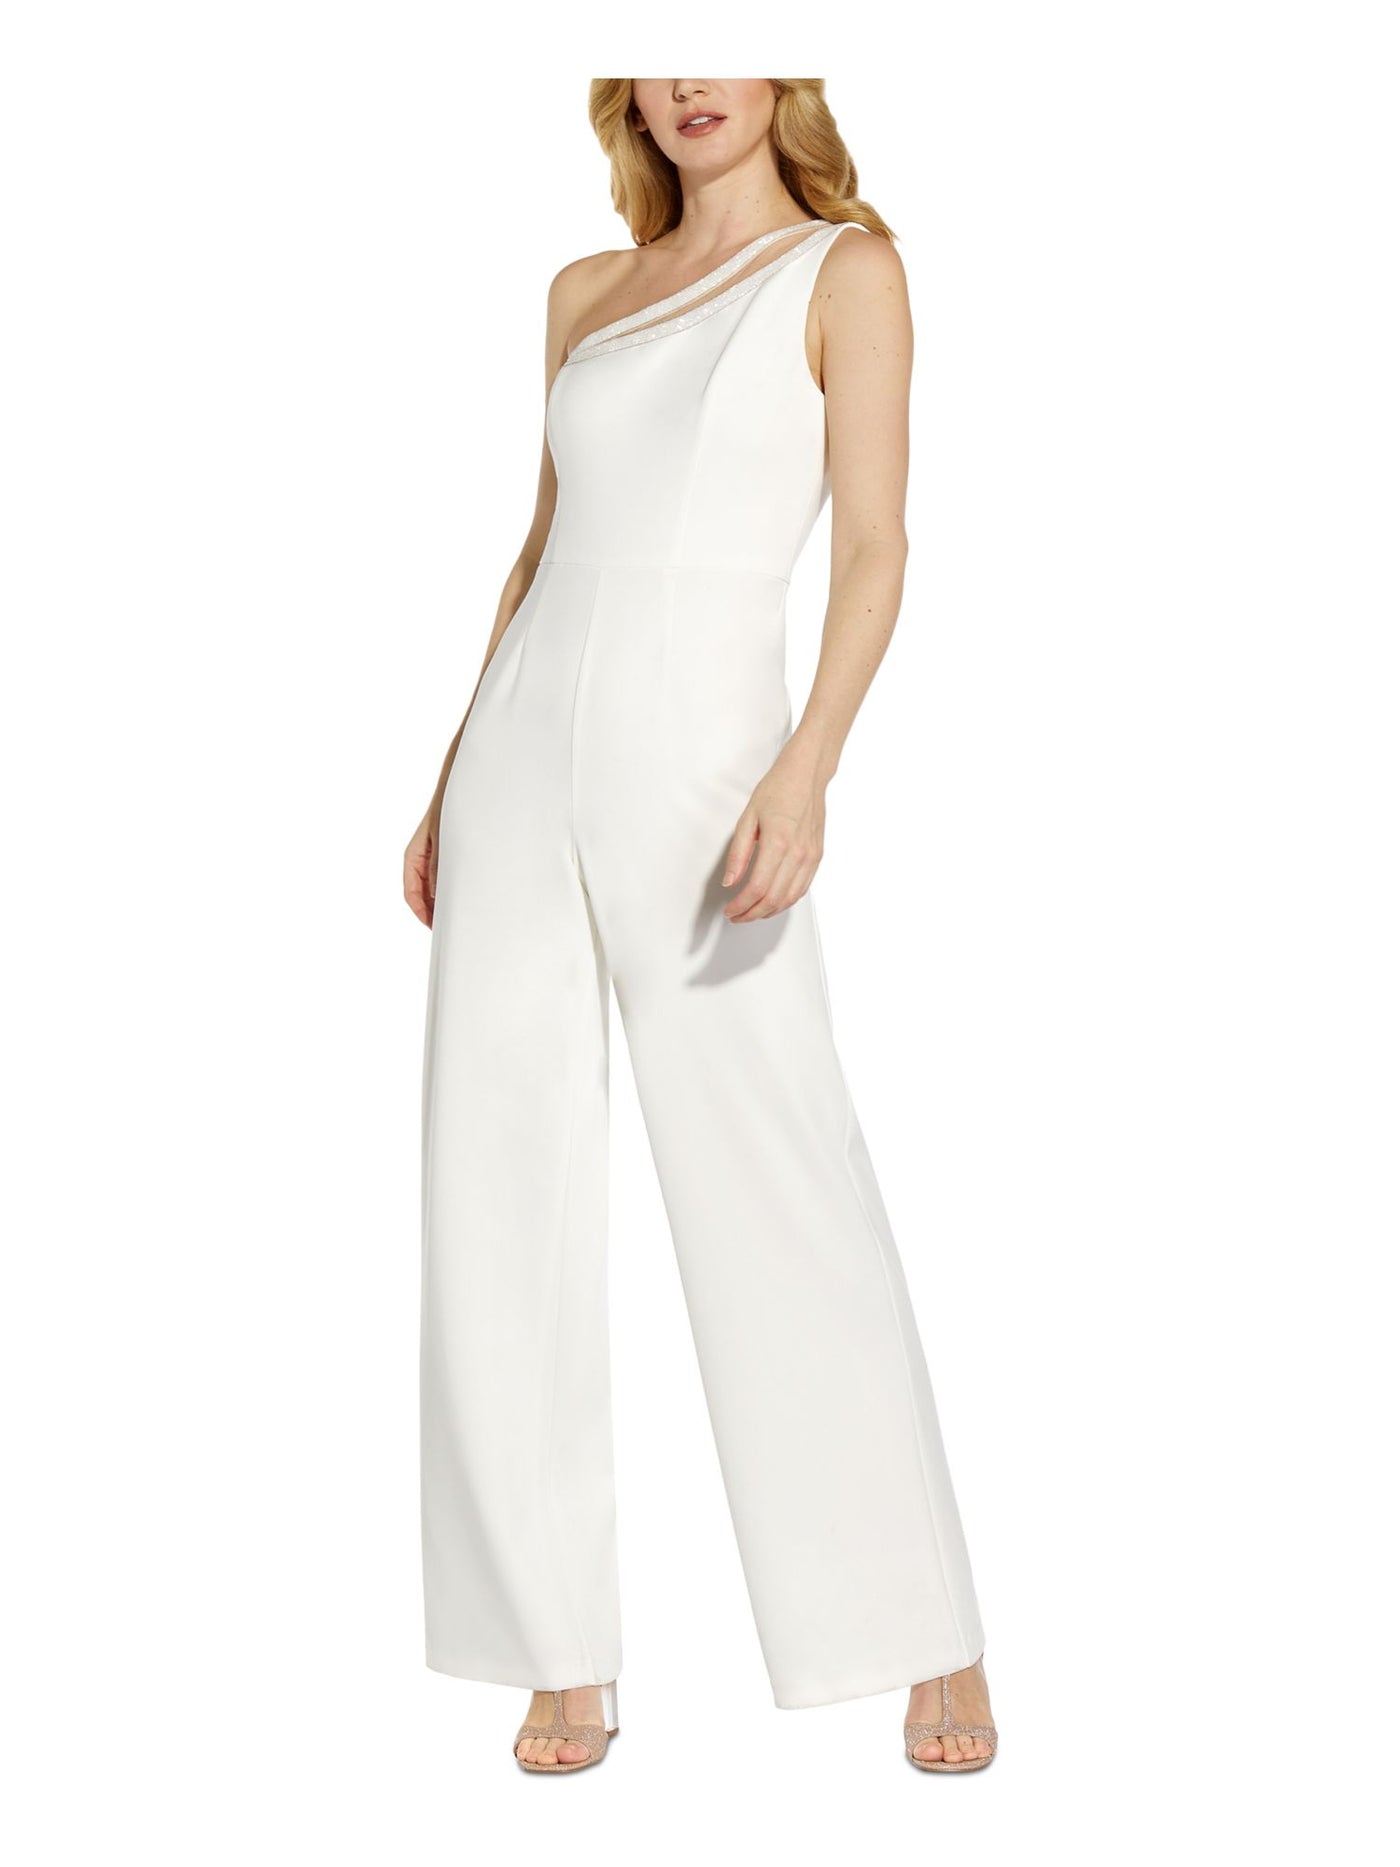 ADRIANNA PAPELL Womens White Stretch Zippered Embellished Illusion Sleeveless Asymmetrical Neckline Formal Jumpsuit 4